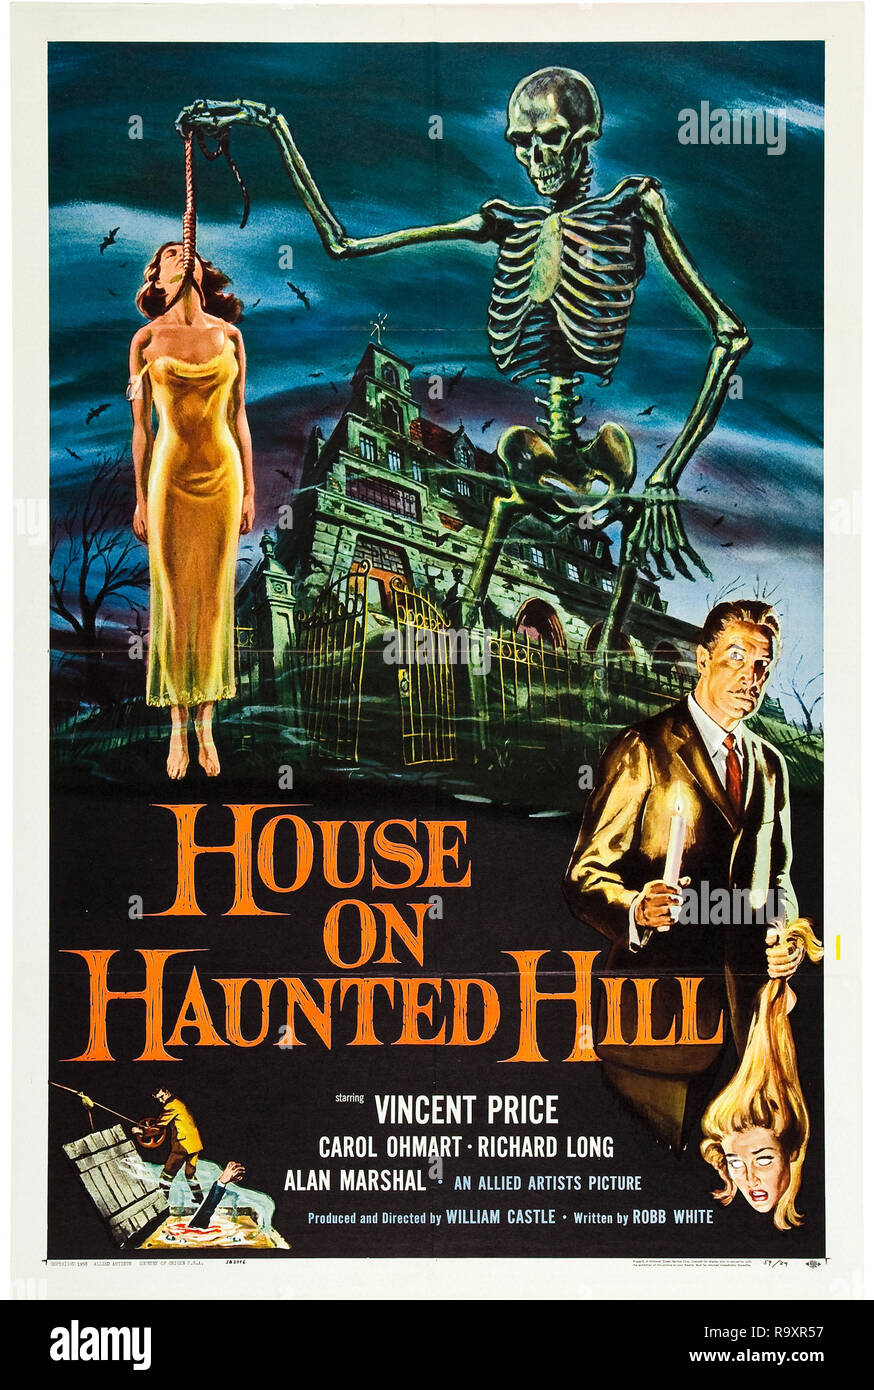 House on Haunted Hill (Allied Artists, 1959) Poster  Vincent Price  File Reference # 33635 948THA Stock Photo